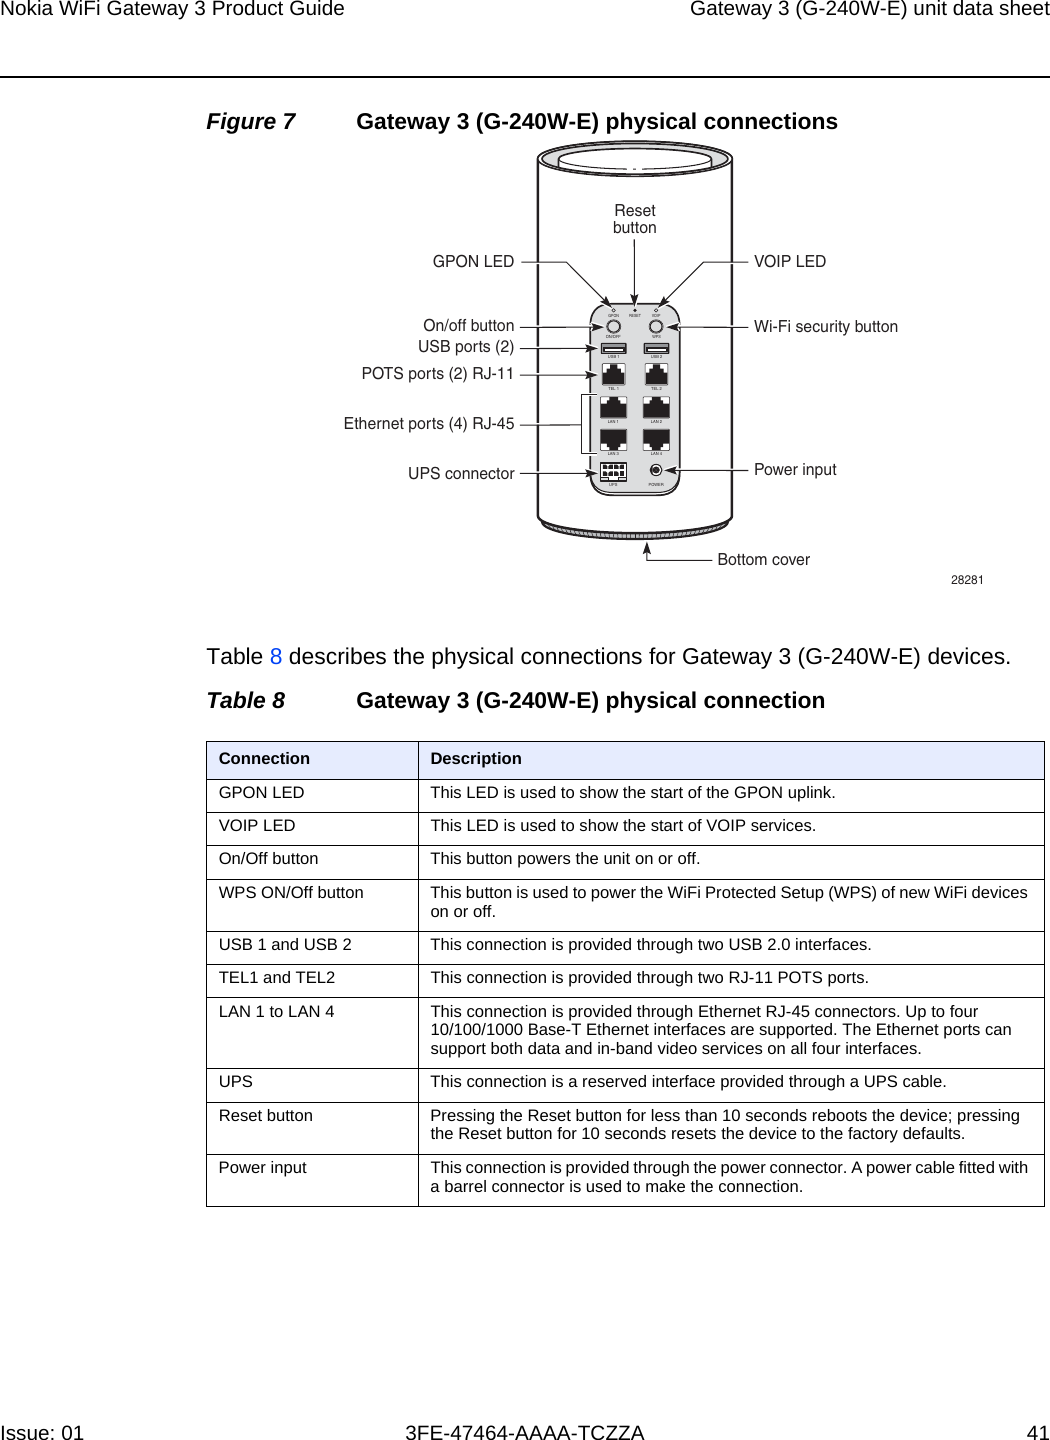 Nokia WiFi Gateway 3 Product Guide Gateway 3 (G-240W-E) unit data sheetIssue: 01 3FE-47464-AAAA-TCZZA 41 Figure 7 Gateway 3 (G-240W-E) physical connectionsTable 8 describes the physical connections for Gateway 3 (G-240W-E) devices.Table 8 Gateway 3 (G-240W-E) physical connectionConnection DescriptionGPON LED This LED is used to show the start of the GPON uplink.VOIP LED This LED is used to show the start of VOIP services.On/Off button This button powers the unit on or off.WPS ON/Off button This button is used to power the WiFi Protected Setup (WPS) of new WiFi devices on or off.USB 1 and USB 2 This connection is provided through two USB 2.0 interfaces.TEL1 and TEL2 This connection is provided through two RJ-11 POTS ports.LAN 1 to LAN 4 This connection is provided through Ethernet RJ-45 connectors. Up to four 10/100/1000 Base-T Ethernet interfaces are supported. The Ethernet ports can support both data and in-band video services on all four interfaces.UPS This connection is a reserved interface provided through a UPS cable.Reset button Pressing the Reset button for less than 10 seconds reboots the device; pressing the Reset button for 10 seconds resets the device to the factory defaults.Power input This connection is provided through the power connector. A power cable fitted with a barrel connector is used to make the connection.ON/OFFRESETGPON VOIPWPSLAN 1 LAN 2LAN 3POWERUPSLAN 4TEL 1 TEL 2USB 1 USB 2Power inputBottom coverWi-Fi security buttonVOIP LEDGPON LEDResetbuttonOn/off buttonUSB ports (2)POTS ports (2) RJ-11Ethernet ports (4) RJ-45UPS connector28281